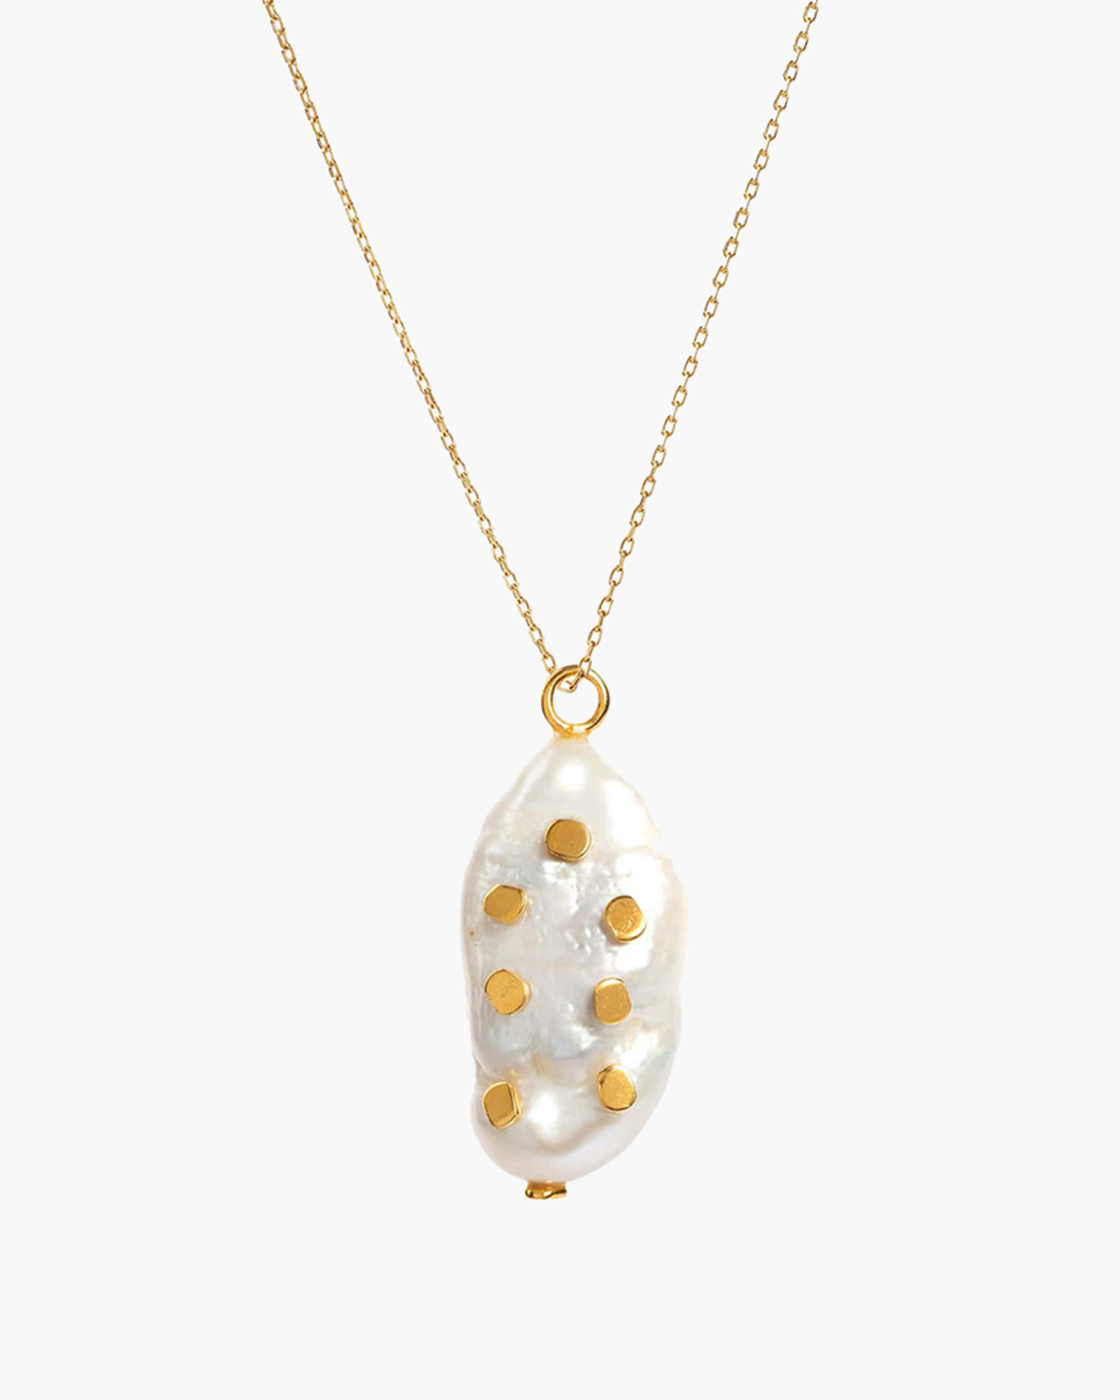 Venus Gold Chain Necklace with Pearl and Barnacle Pendant